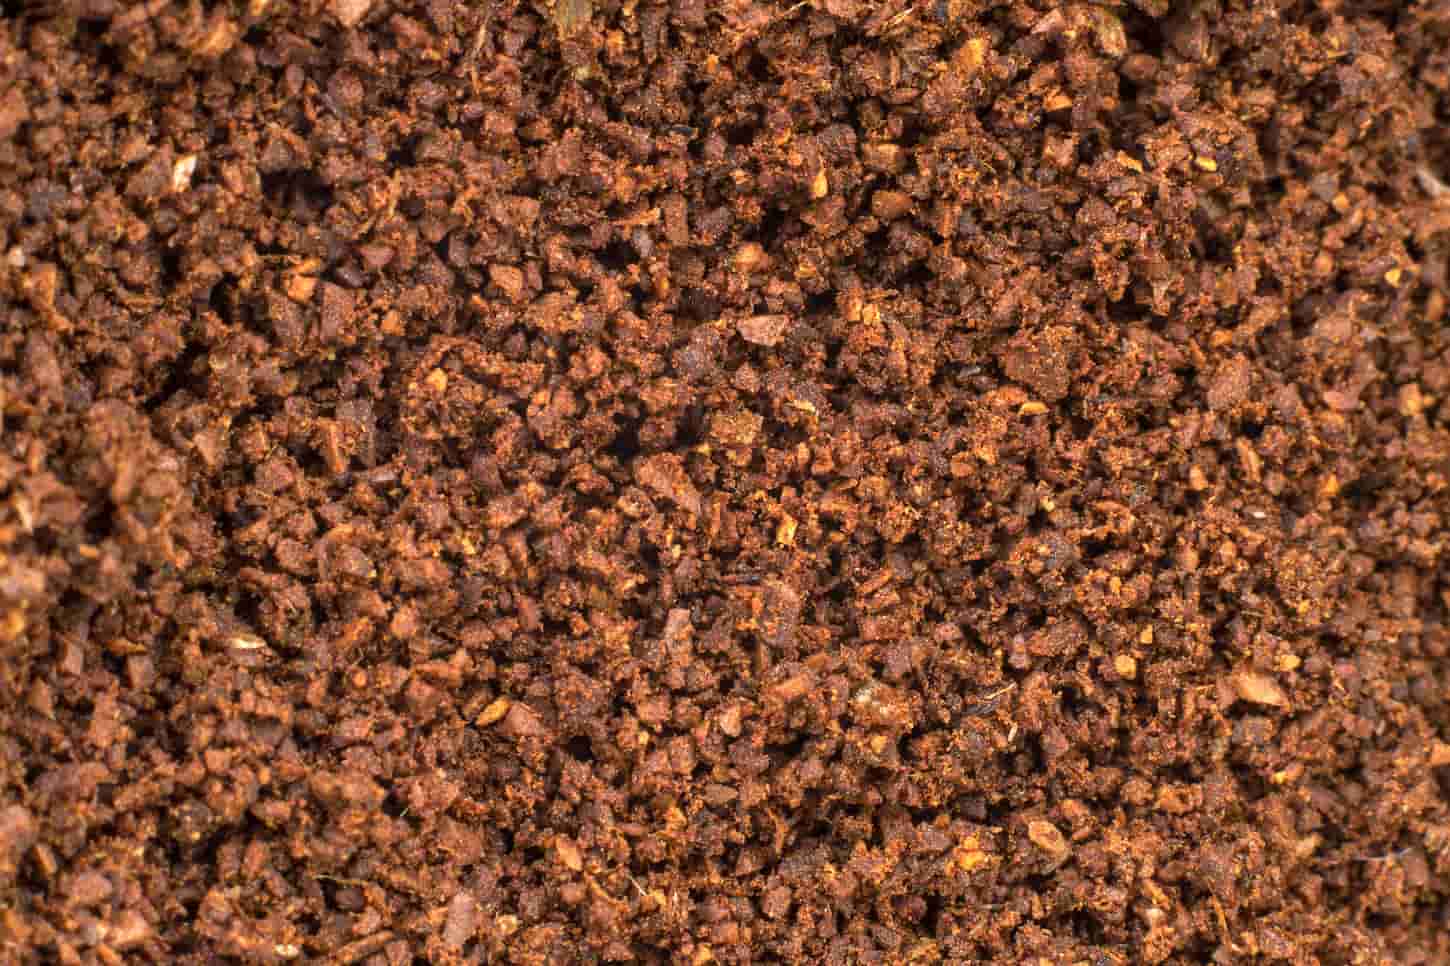 An image of old coffee grounds.